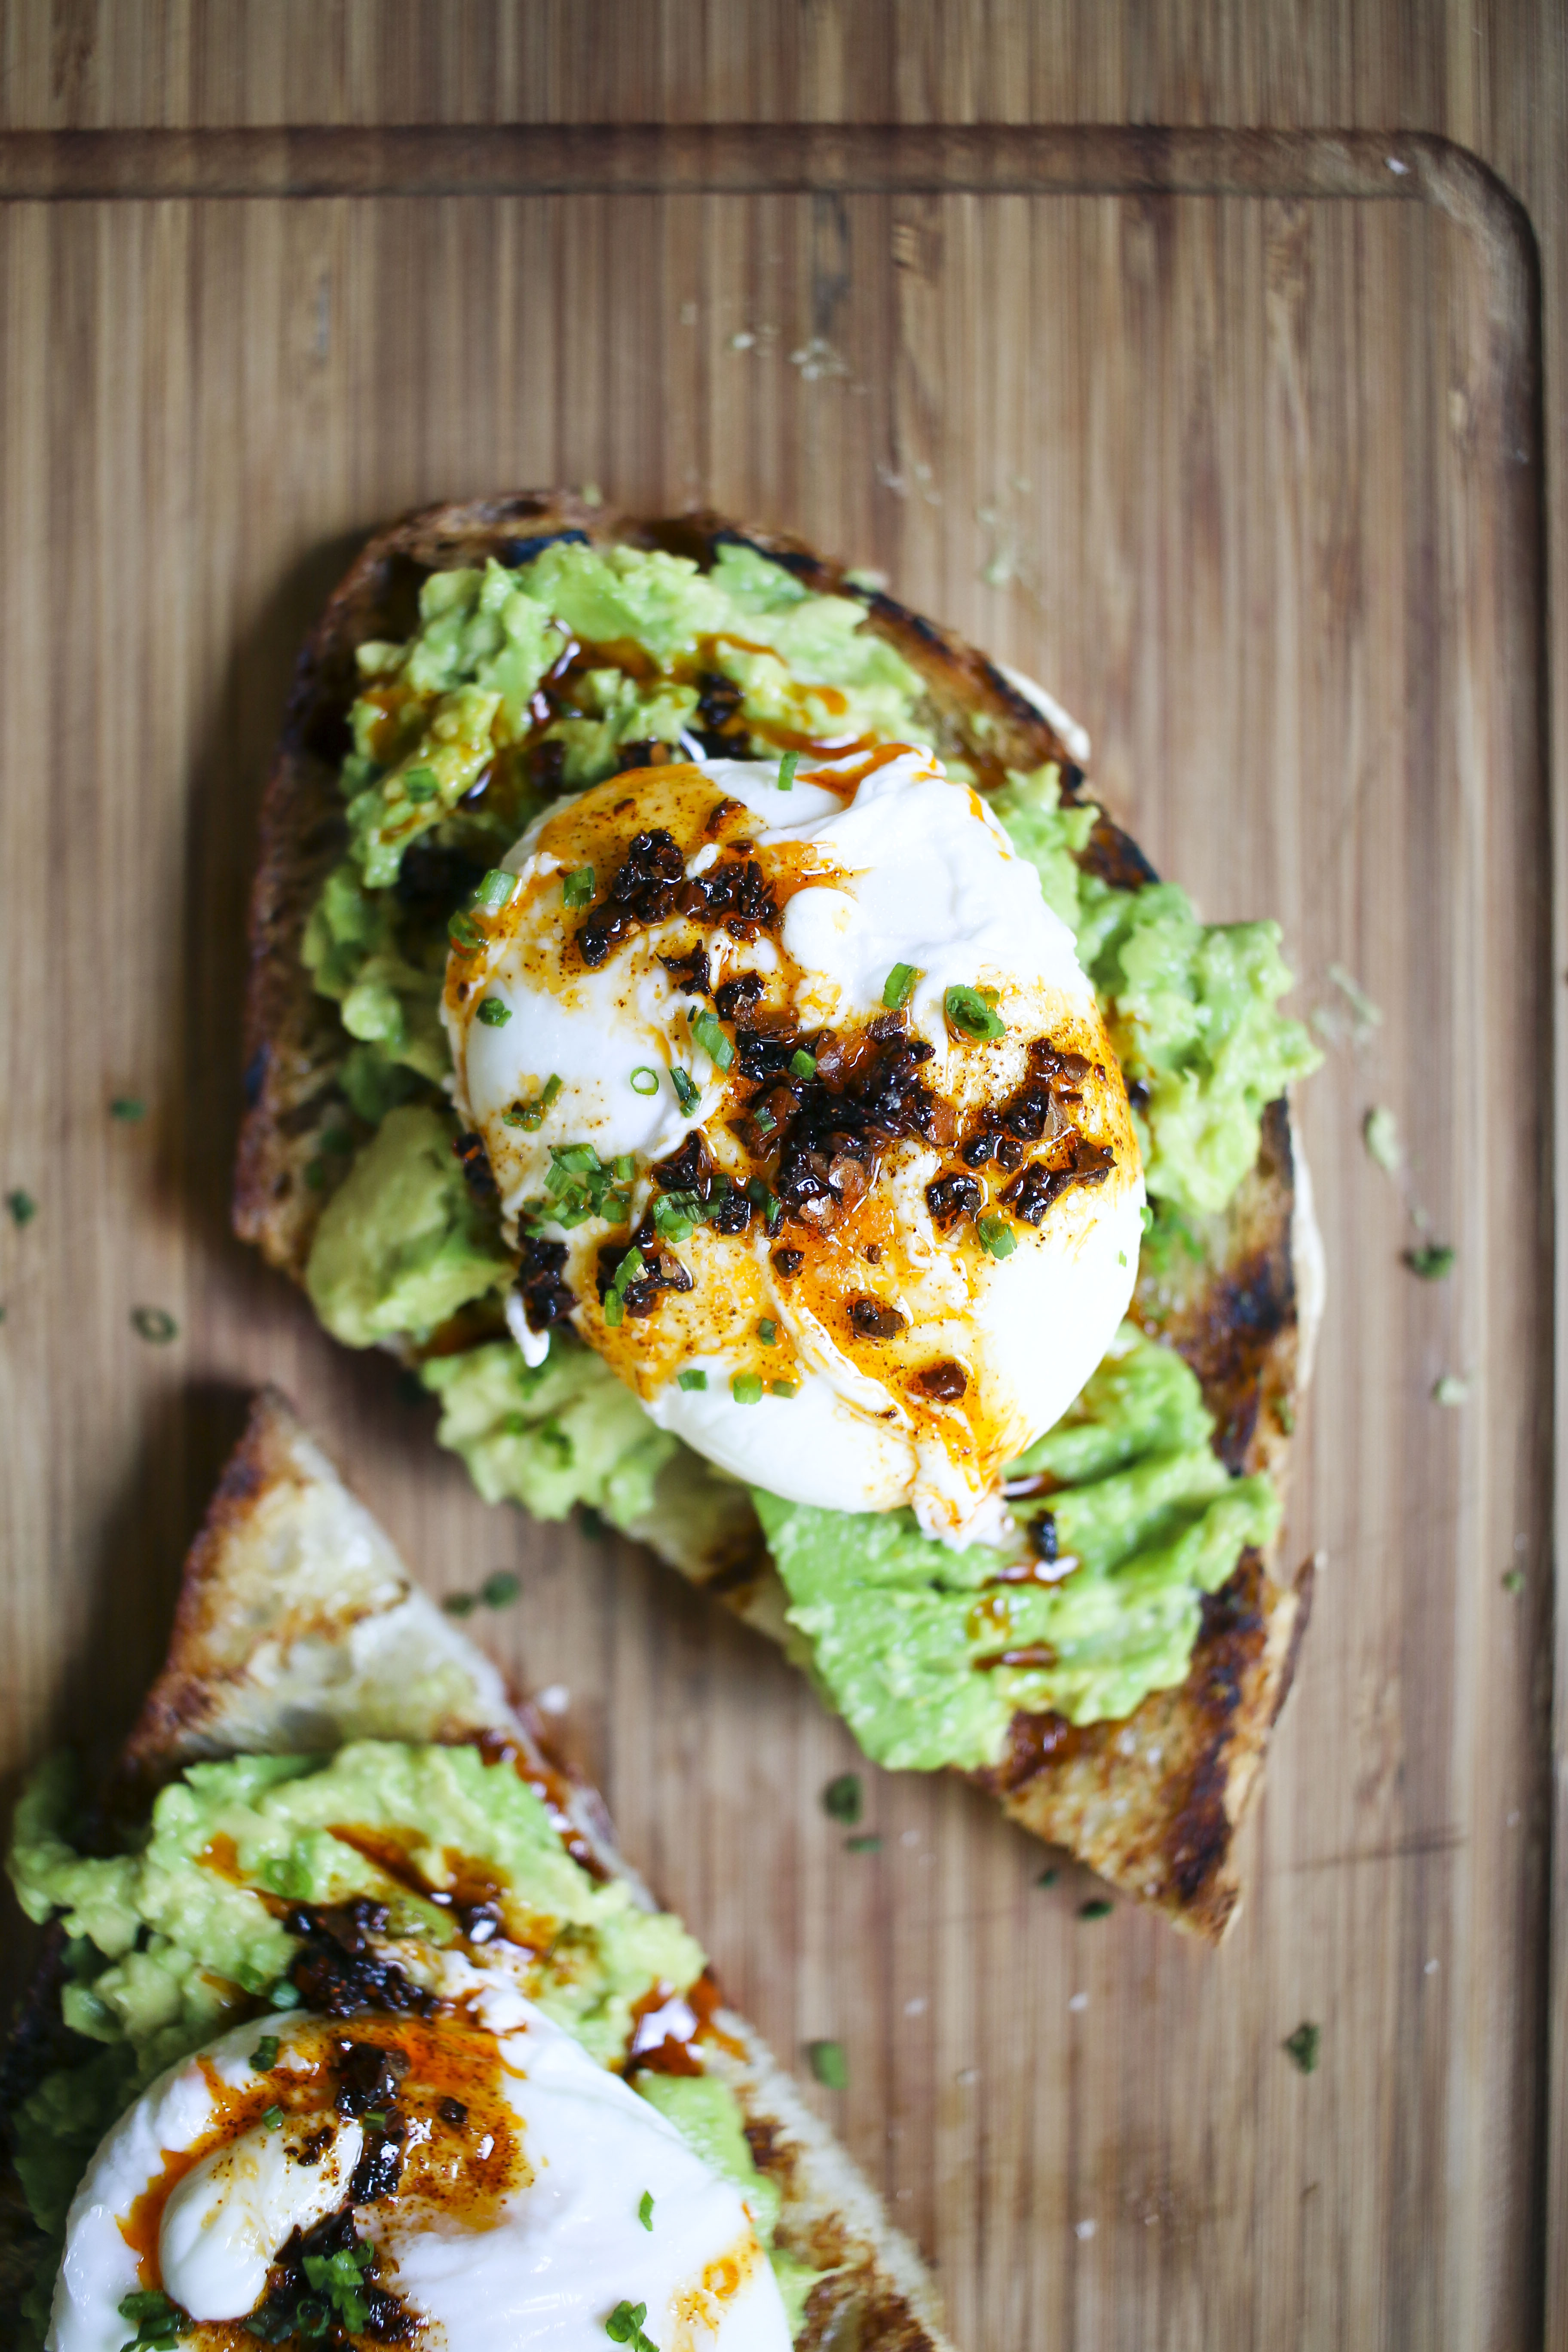 Avocado & Egg Toast with Aleppo Pepper Oil | I Will Not Eat Oysters